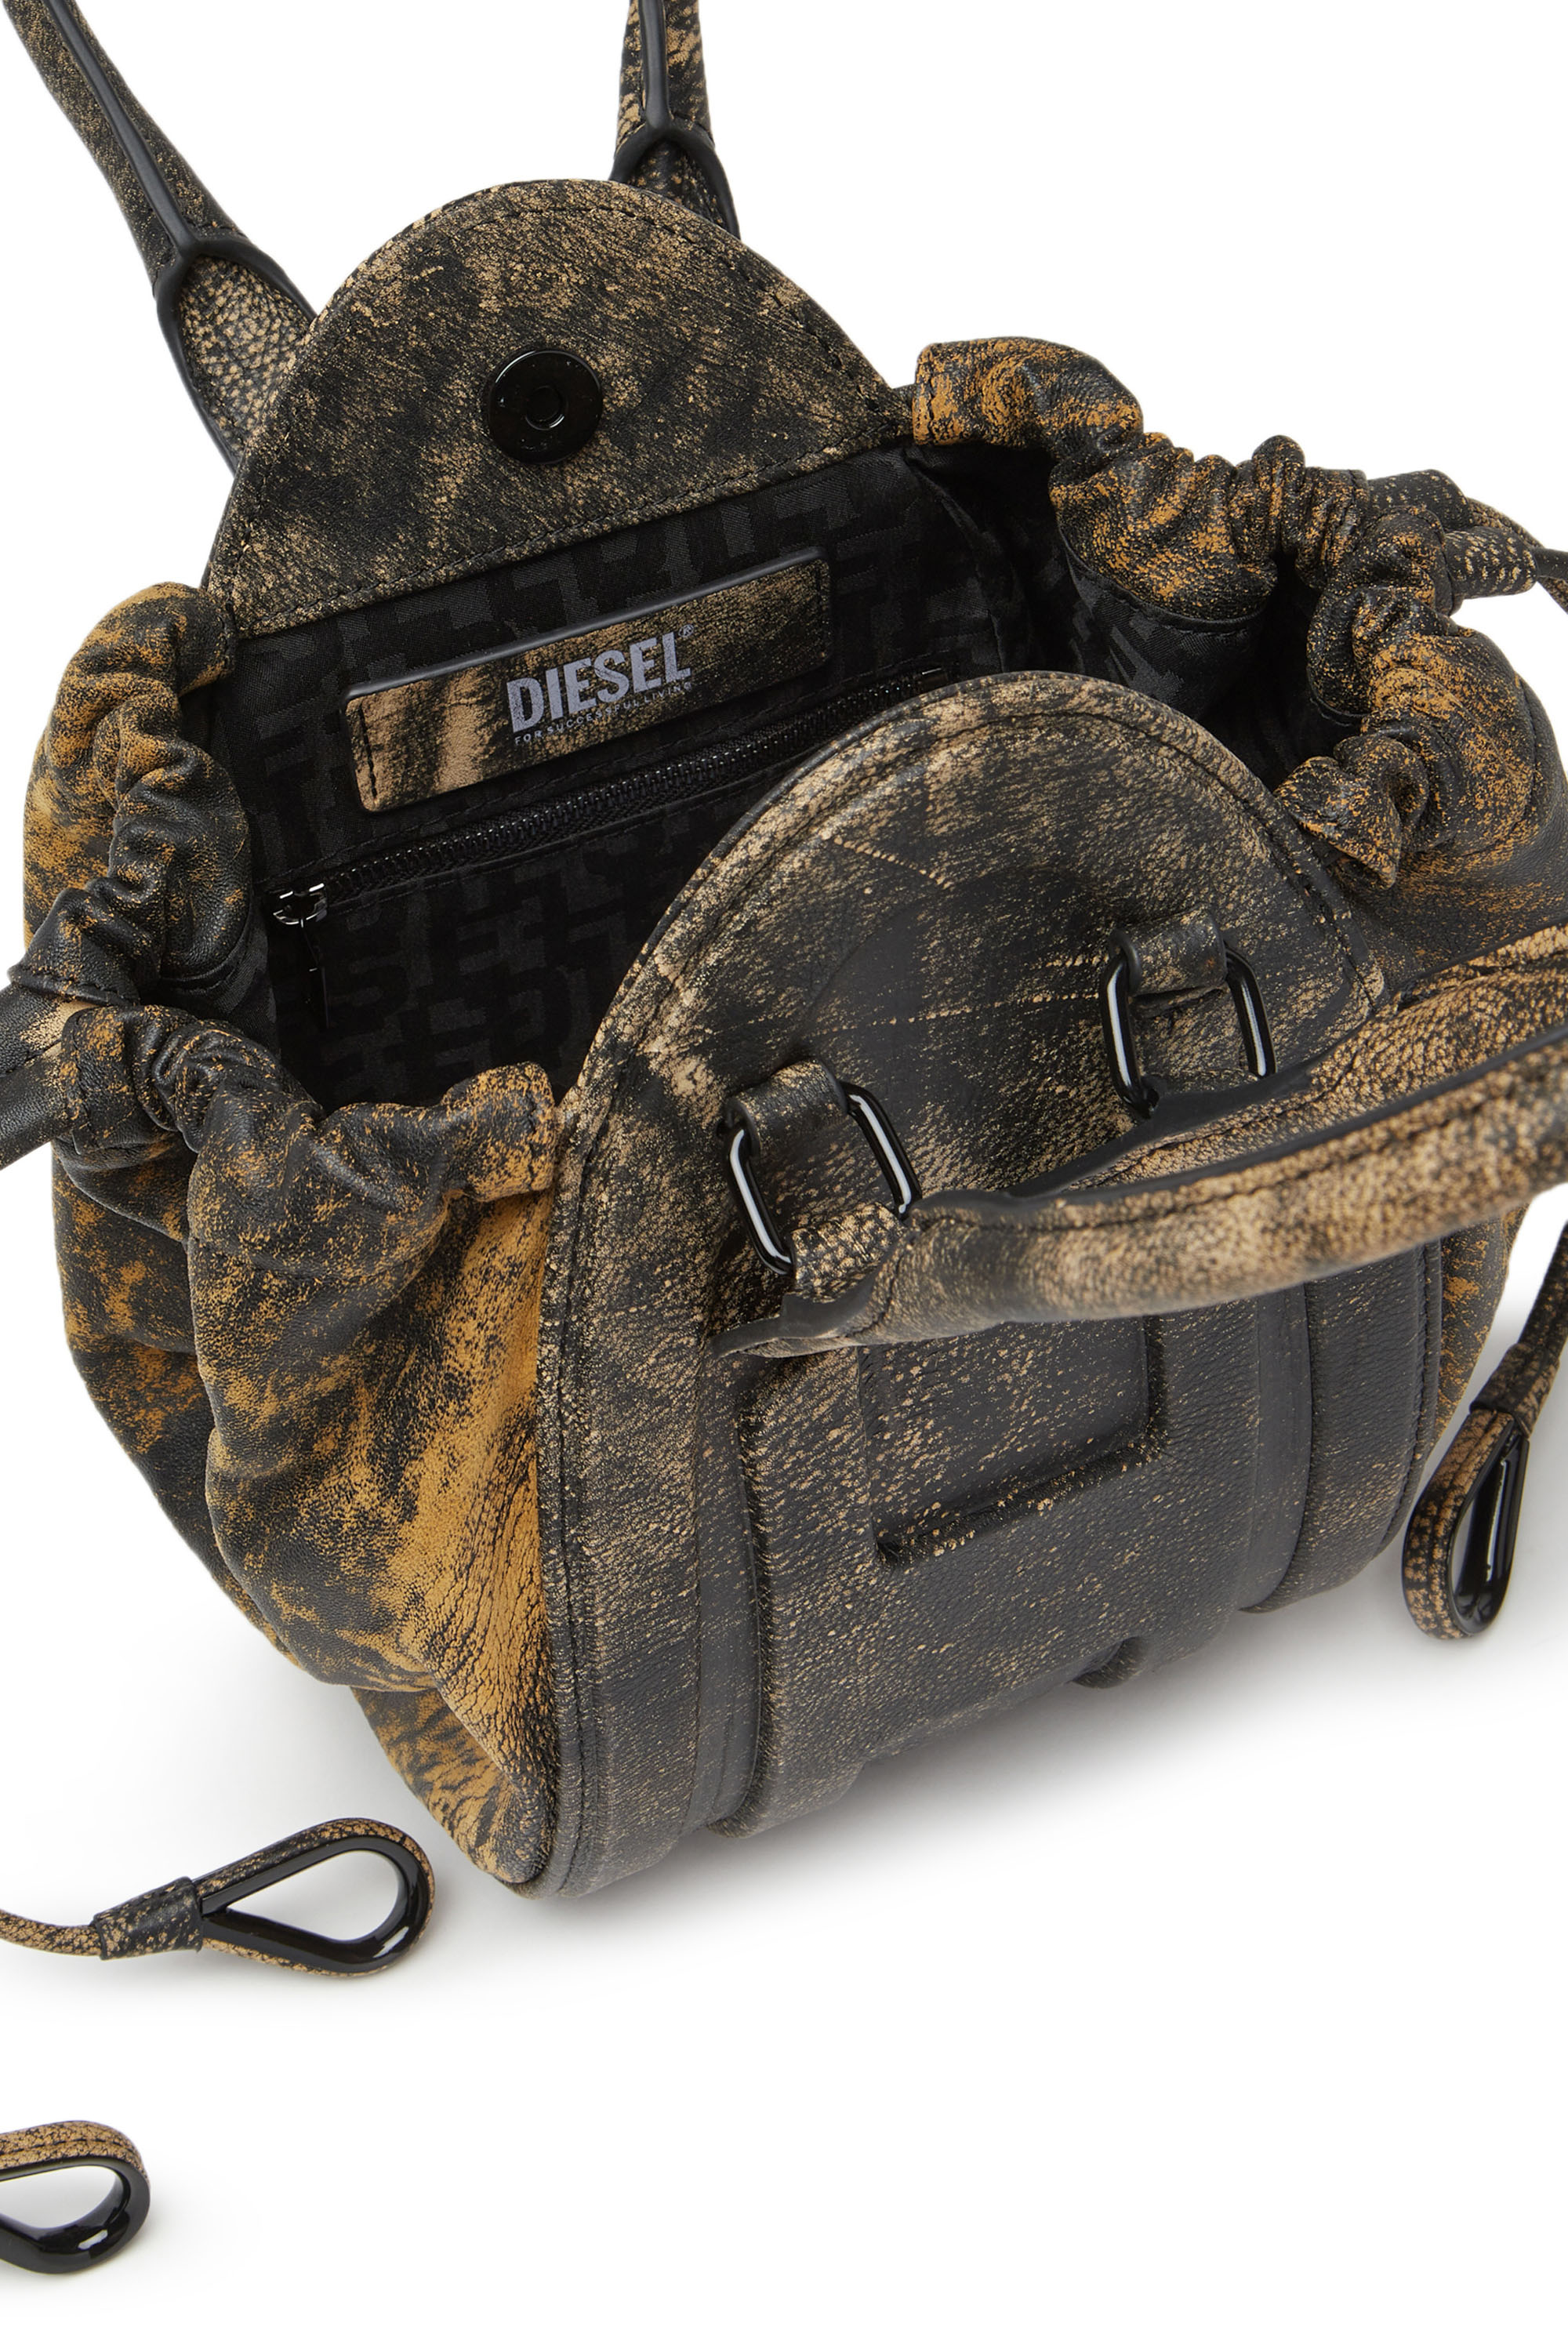 Diesel - 1DR-FOLD XS, Woman 1DR-Fold XS - Oval logo handbag in marbled leather in Brown - Image 4